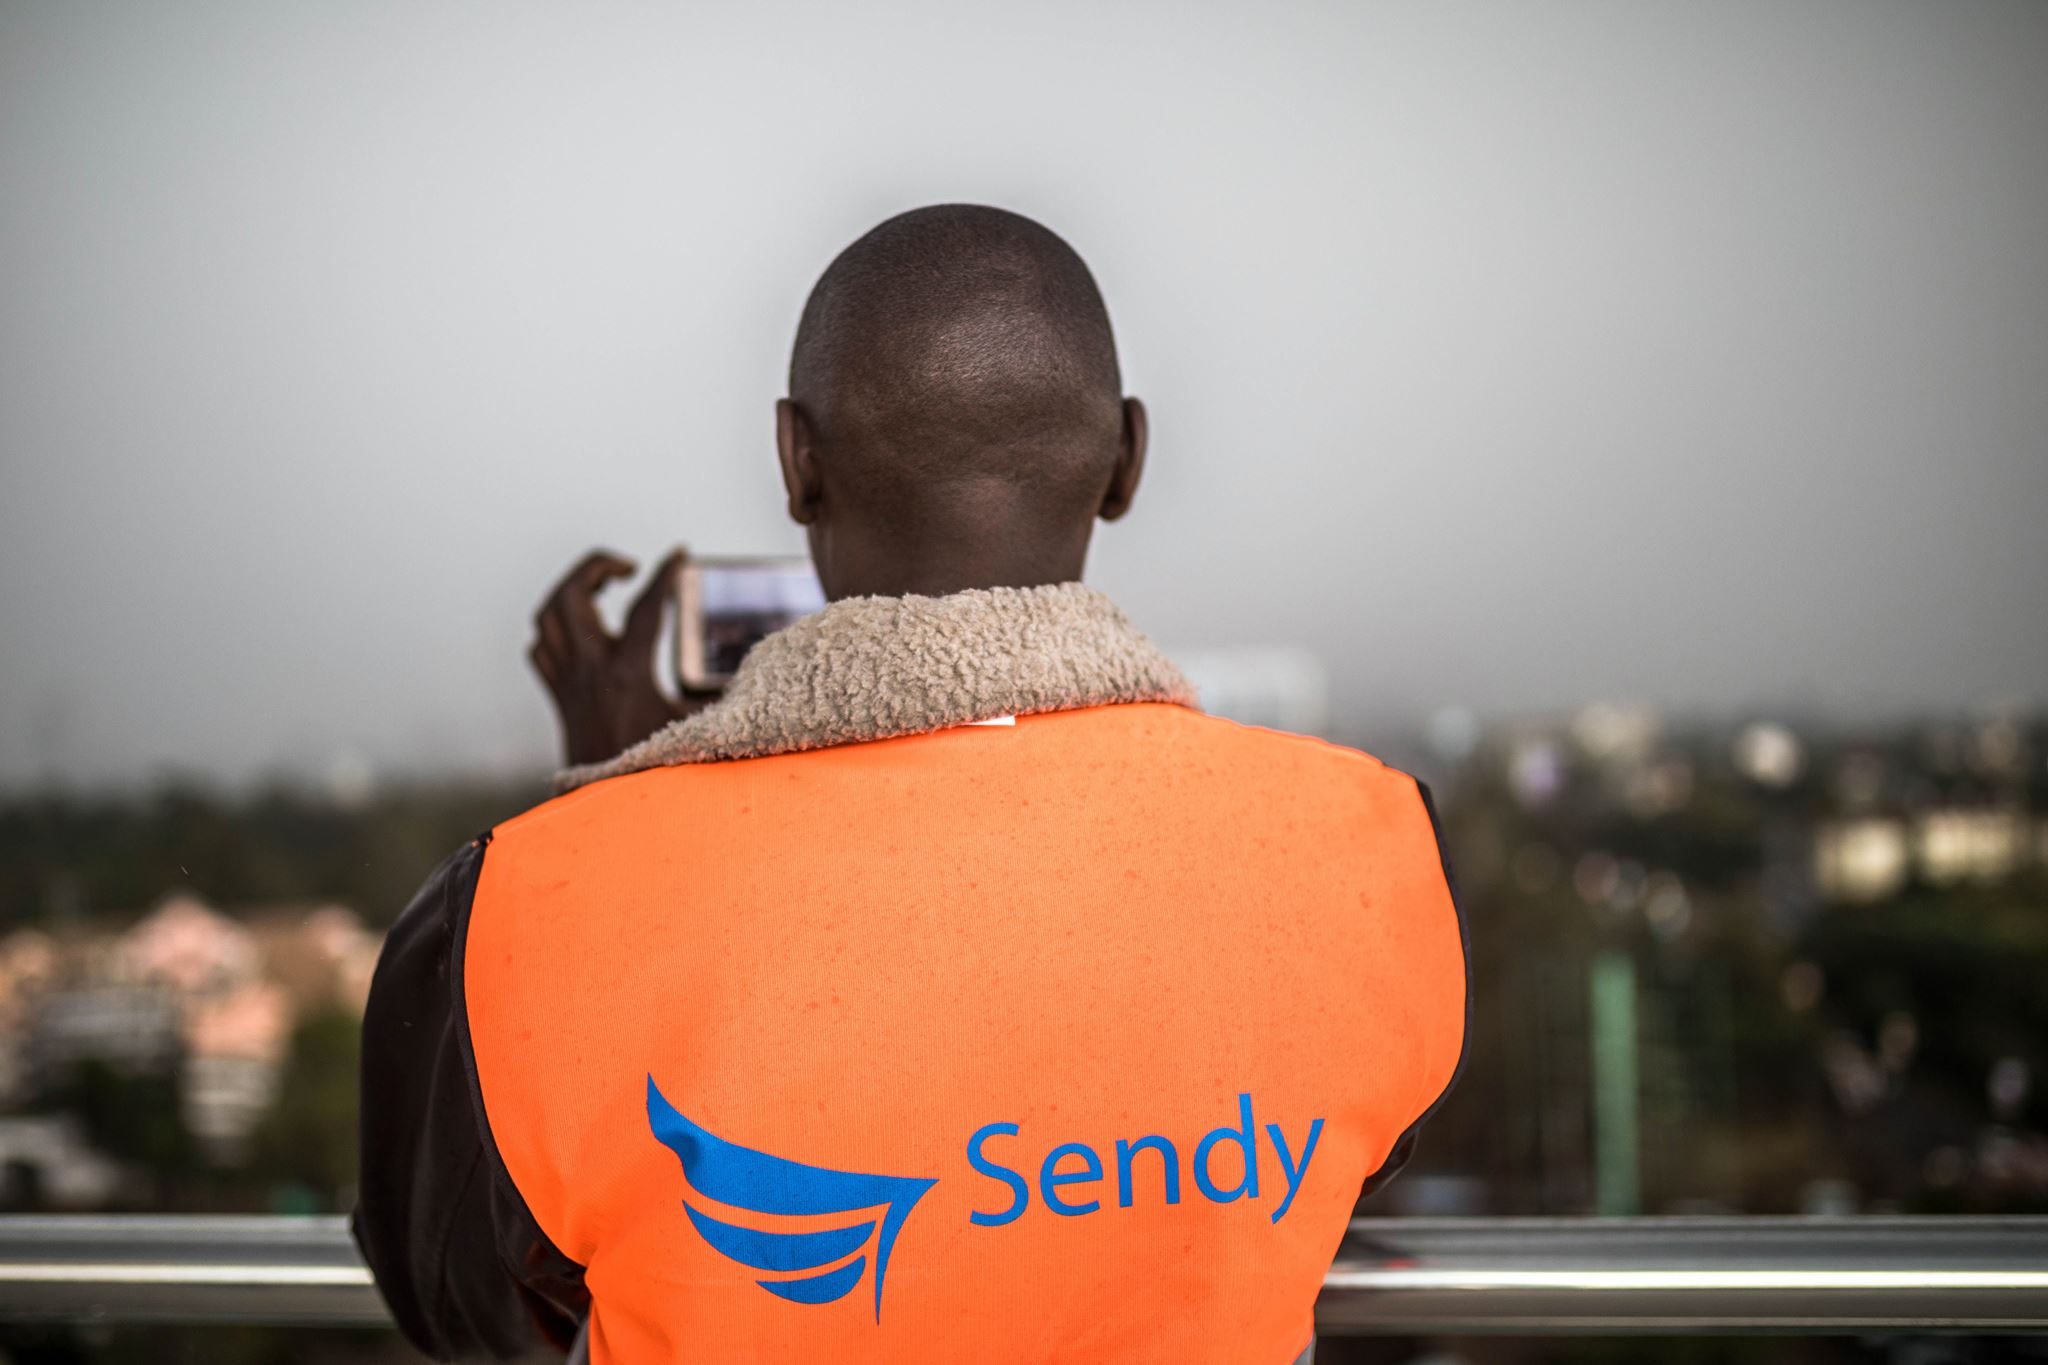 Kenya's Go-Jek, Sendy, plans second fundraising round to expand ops